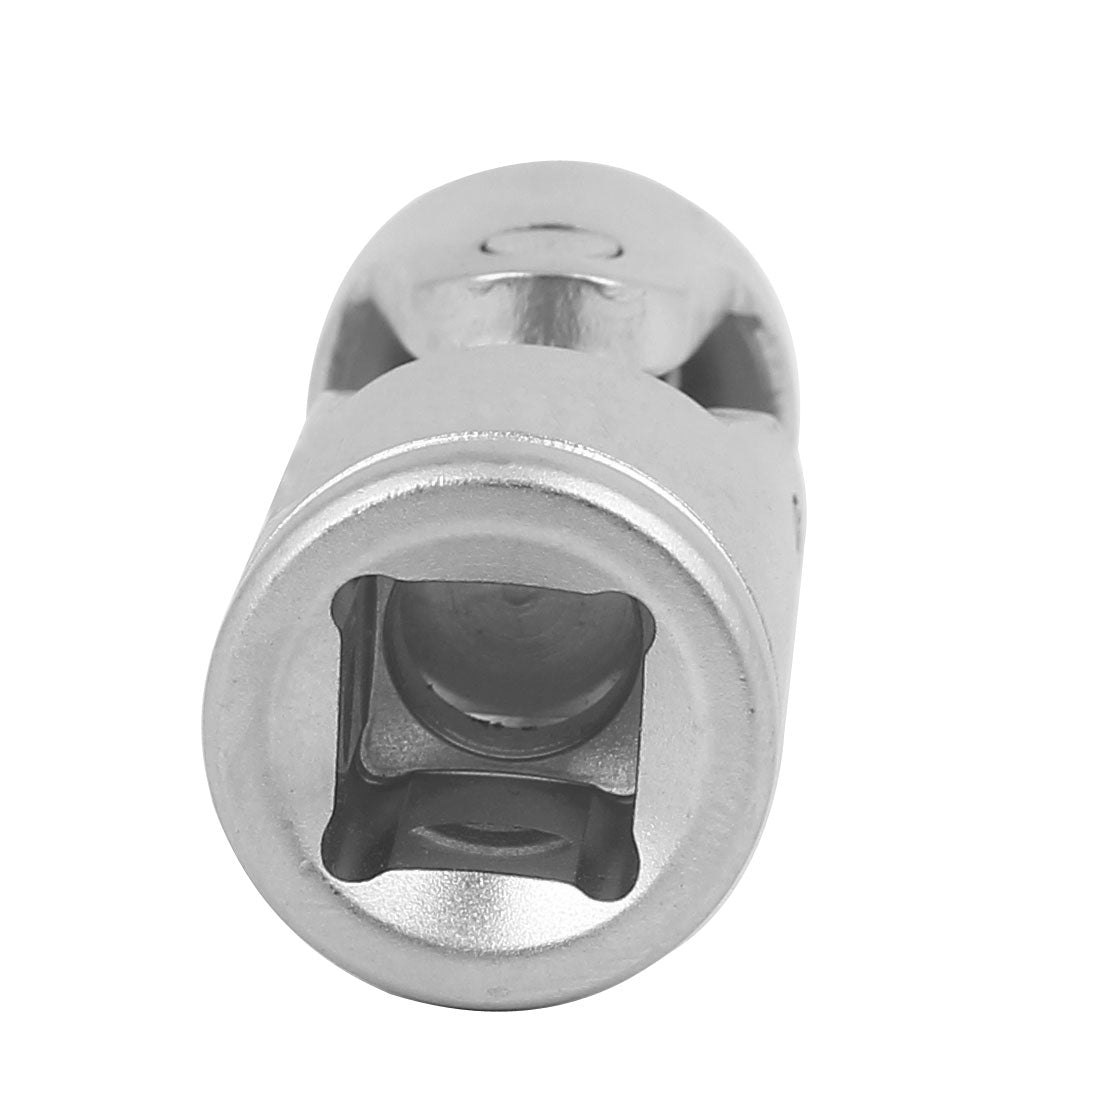 uxcell Uxcell 3/8" Square Driver Chrome Vanadium Steel 90 Degree Universal Joint Swivel Socket Adapter